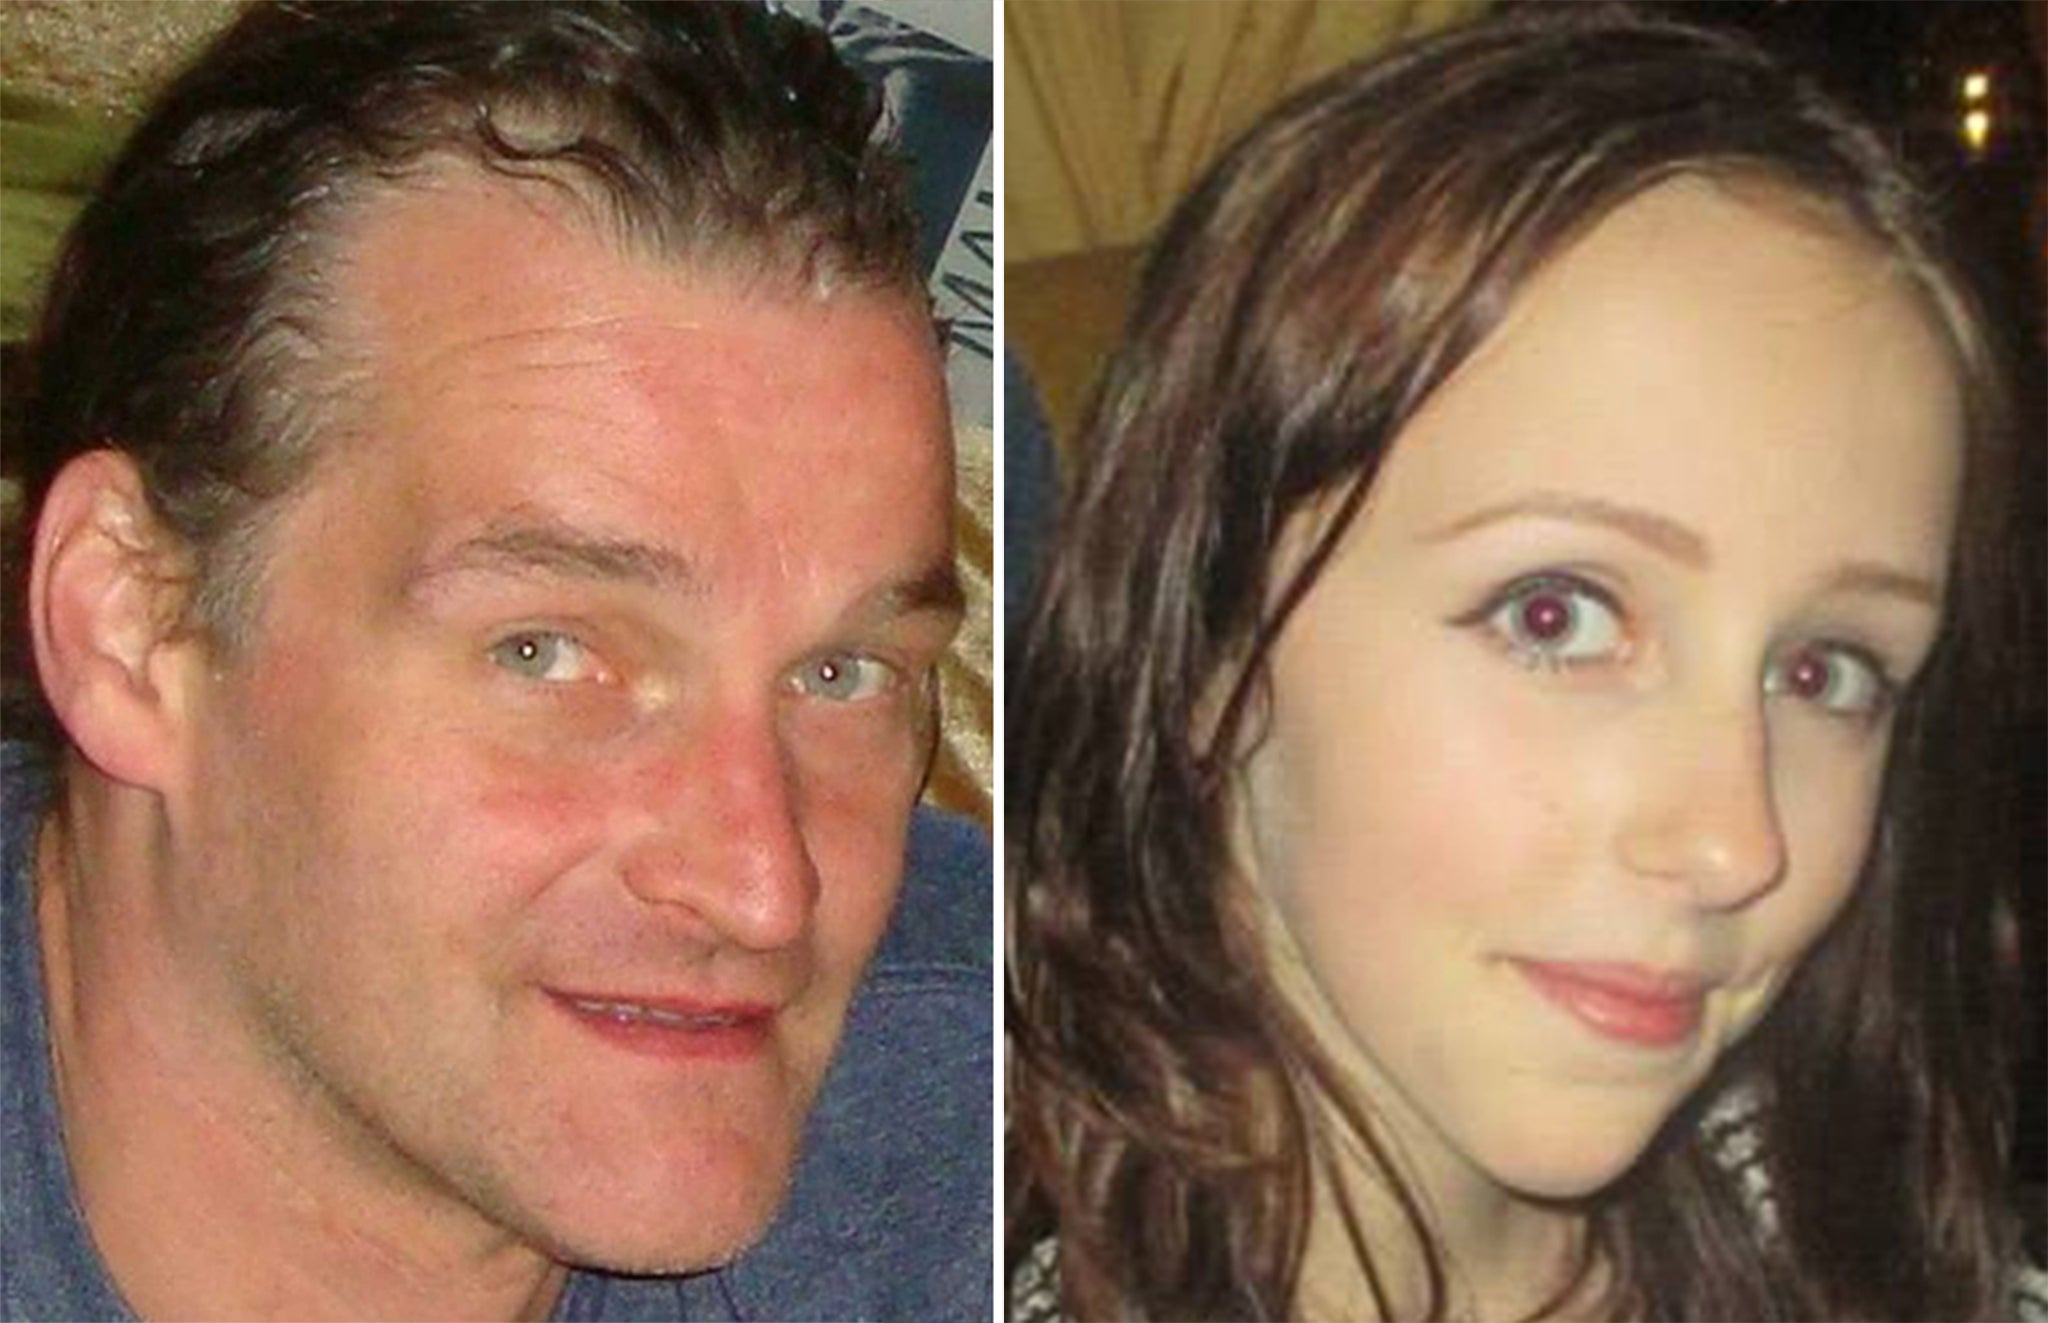 Alice Gross Suspect Arnis Zalkalns Is Convicted Murderer Say Police The Independent The